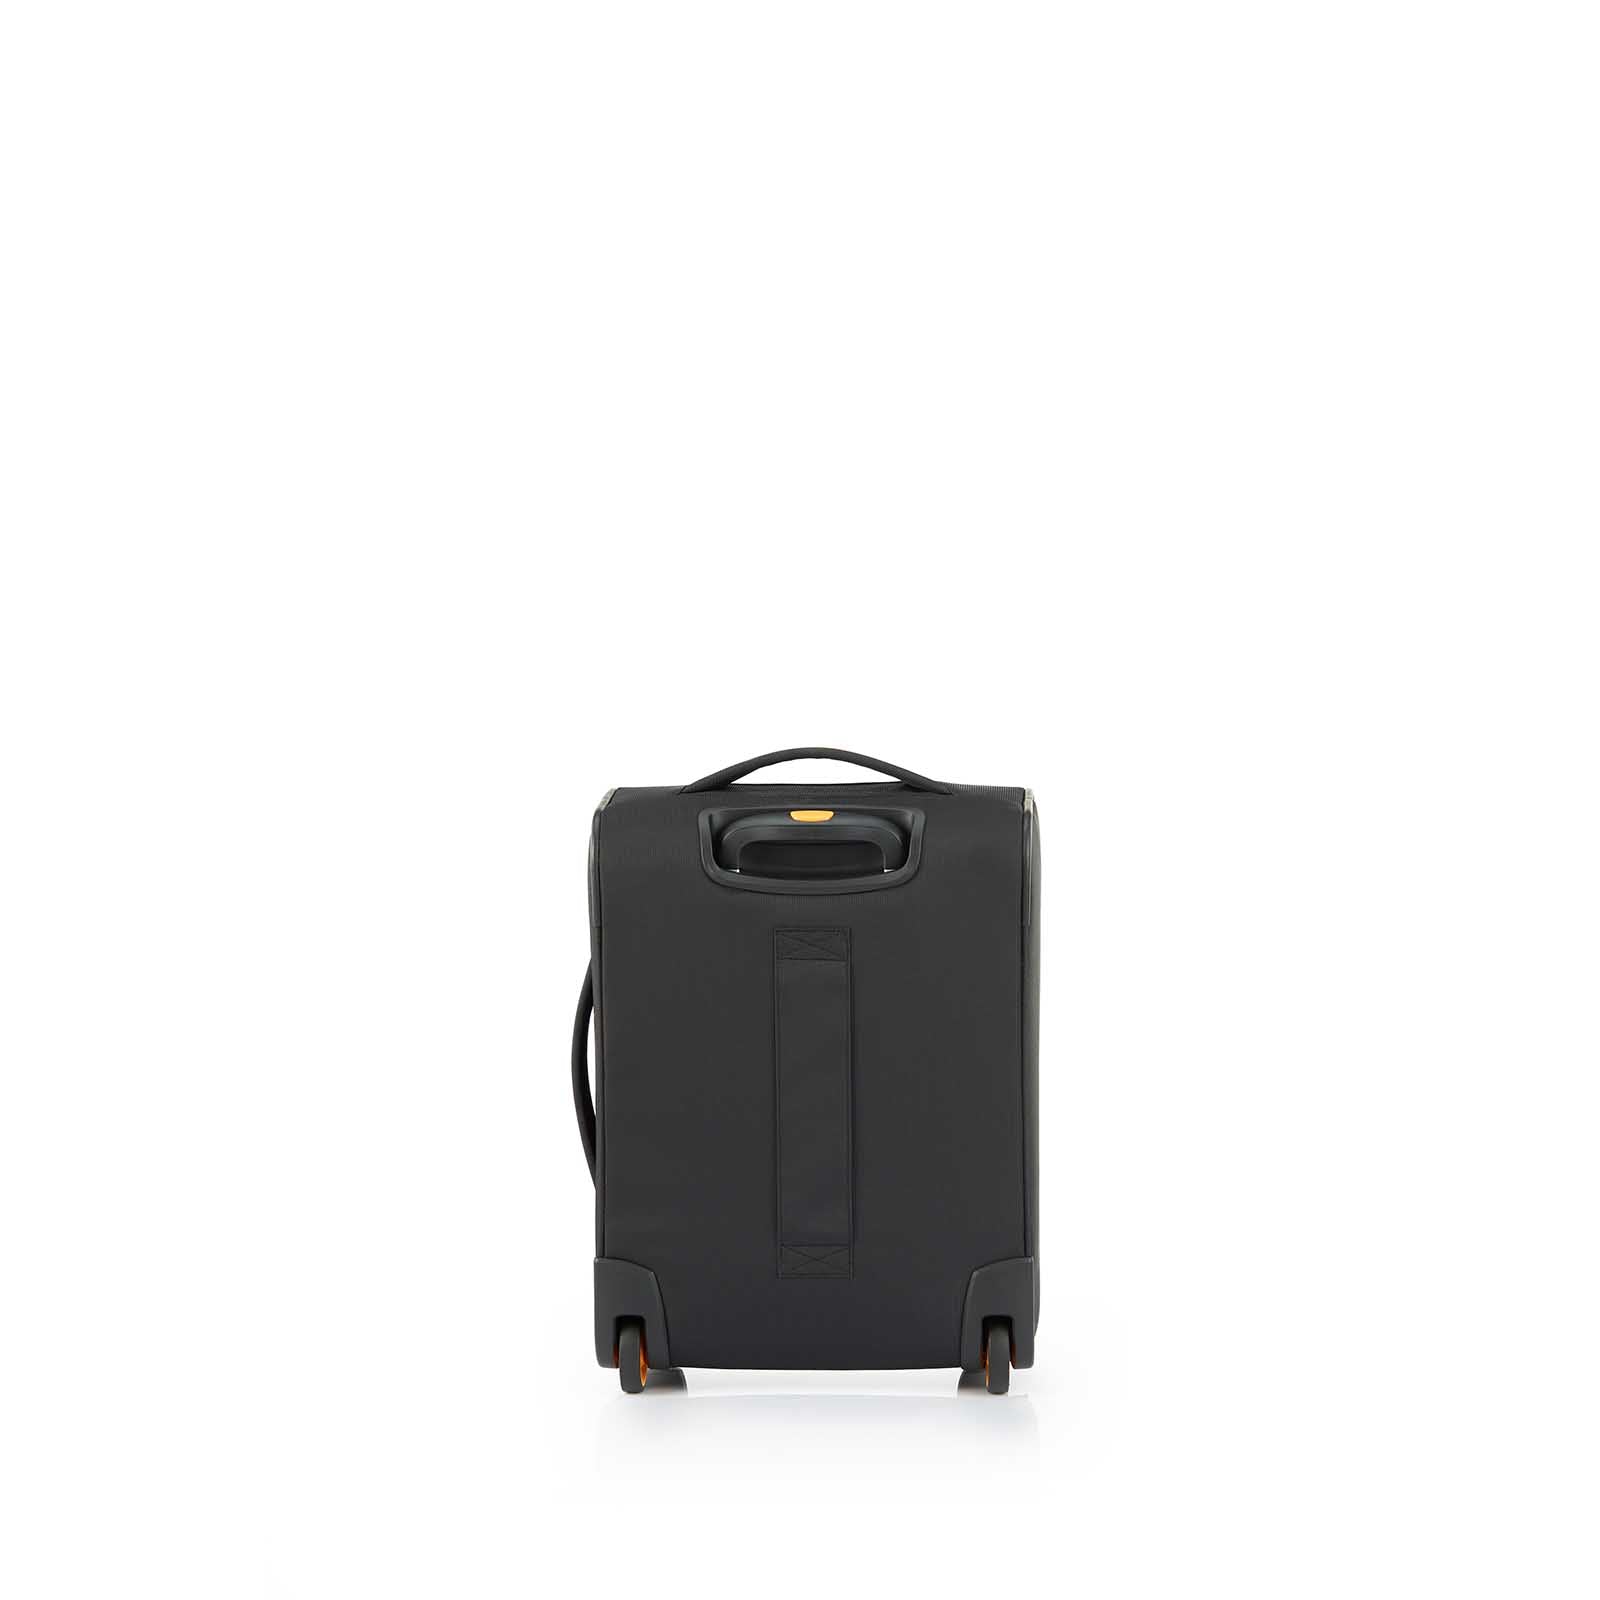 American-Tourister-Applite-4-Eco-50cm-Carry-On-Suitcase-Black-Mustard-Smart-Sleeve